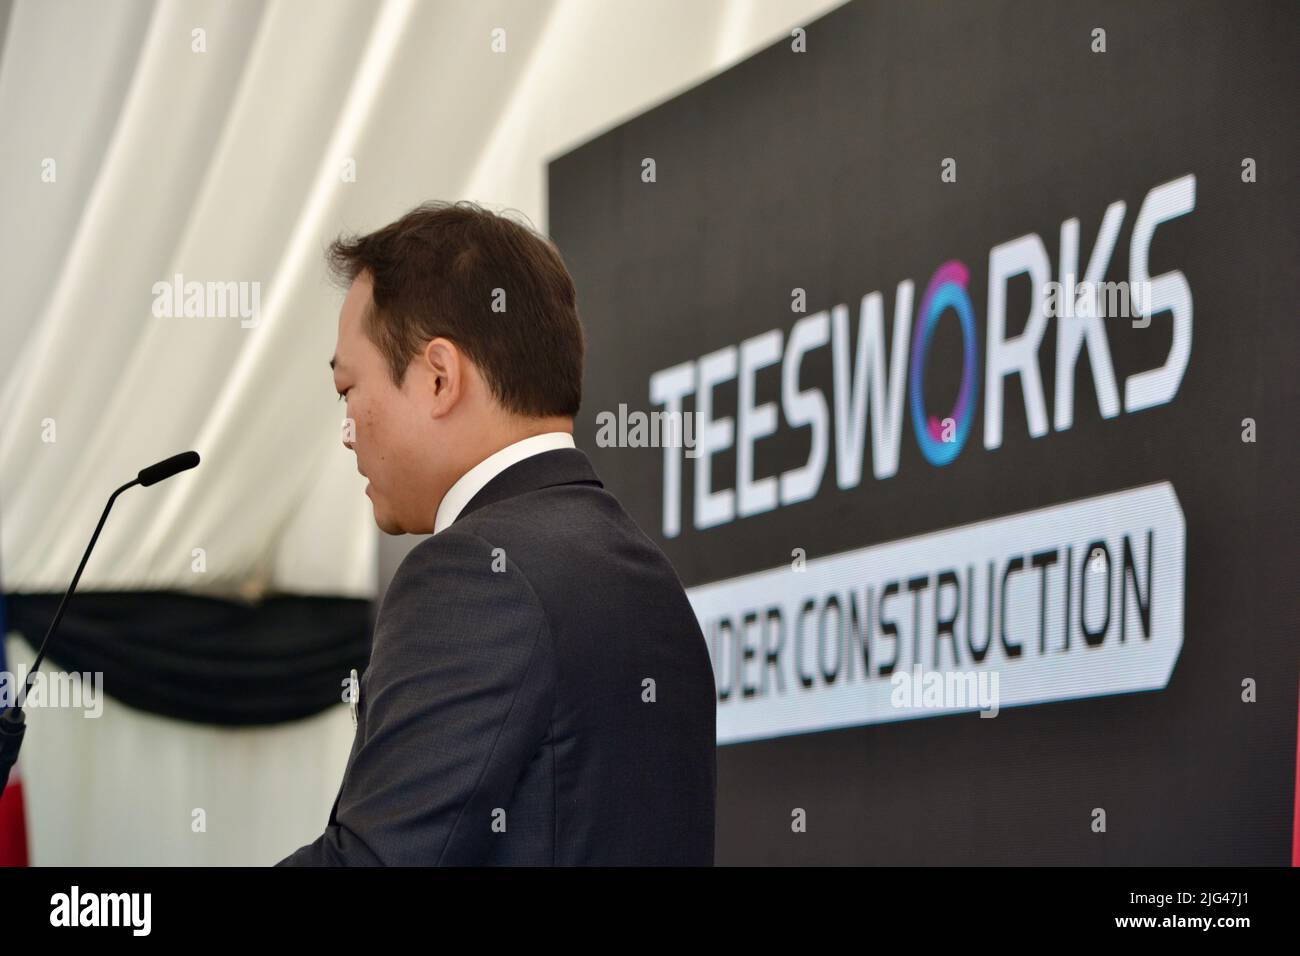 Redcar, UK. 07 Jul 2022. Construction has started on SeAH Wind Ltd’s offshore wind facility marking the first major private sector investment beginning construction at a UK Freeport. President & CEO of SeAH Steel Holdings Joosung Lee (pictured) took part in an official Signing Ceremony, presentations and the ground breaking for the £400million facility, with more than 200 local business leaders also attending. Credit: Teesside Snapper/Alamy Live News Stock Photo